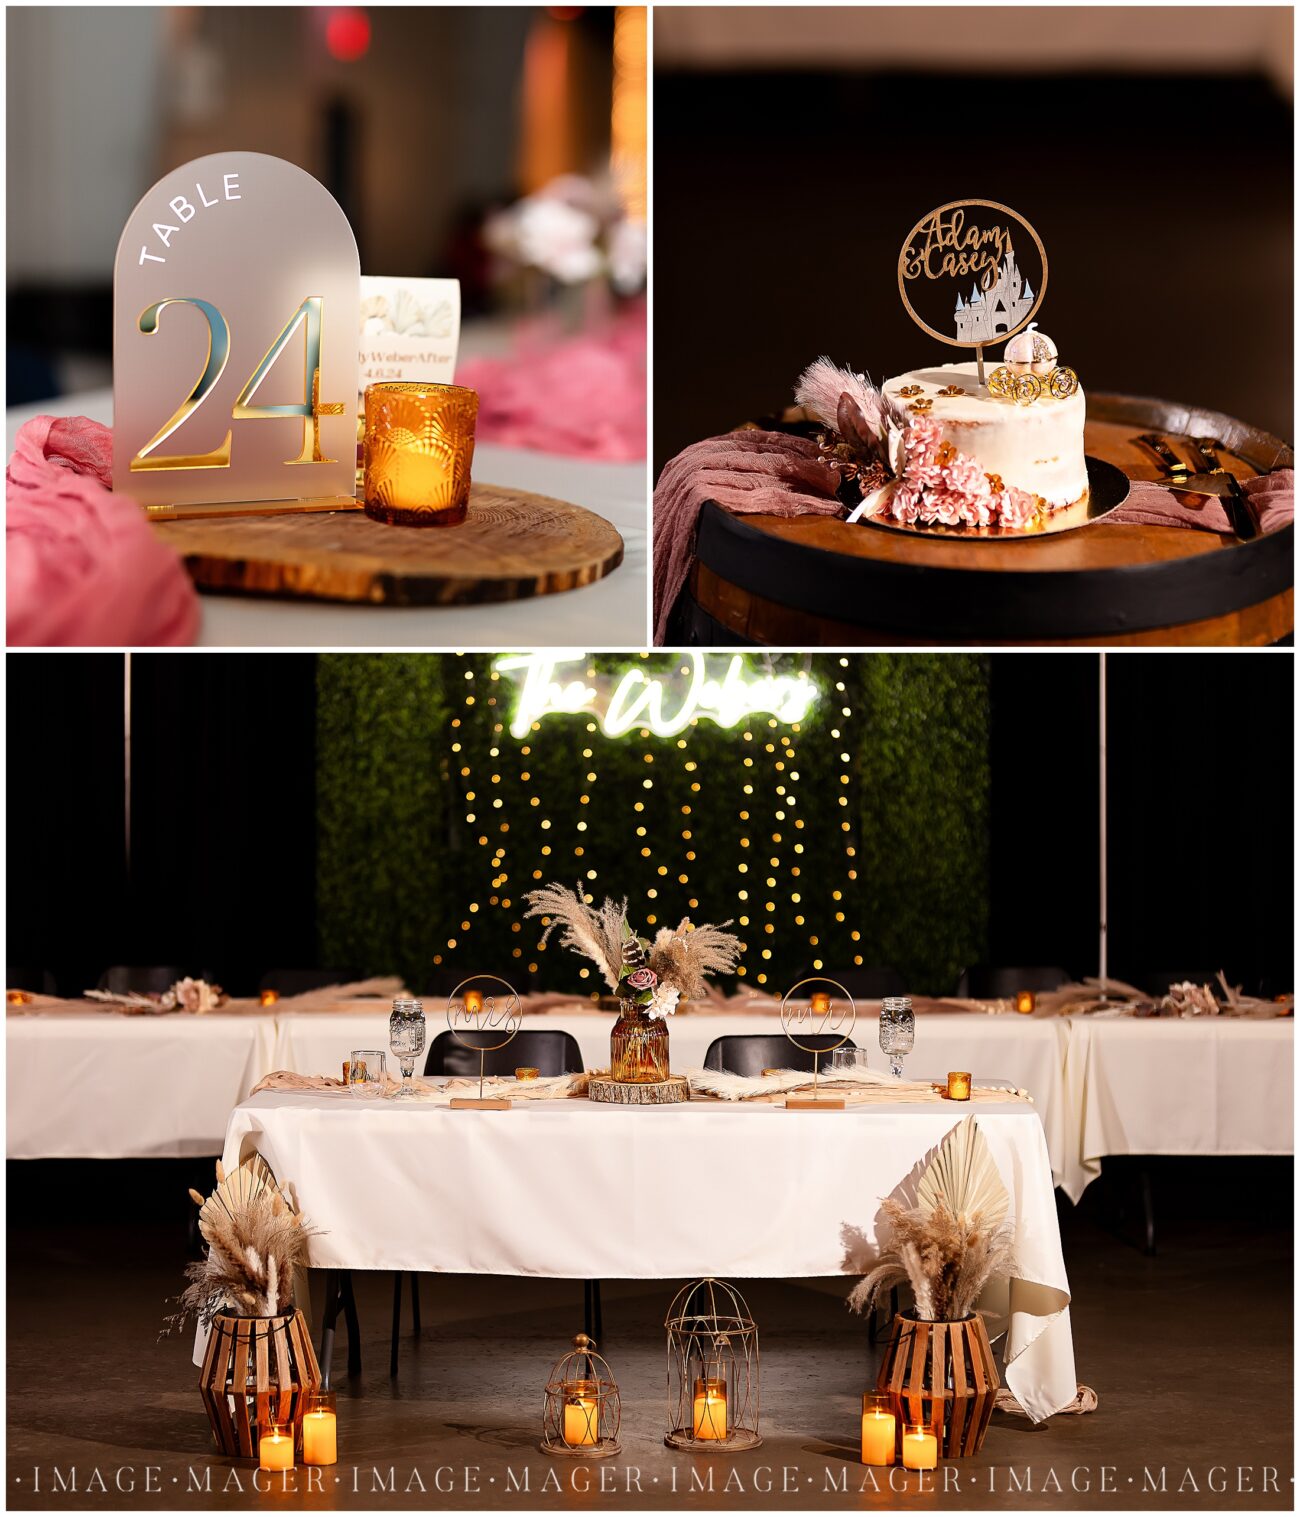 A small town wedding for Casey and Adam. A collage of images of details from the reception at the Kankakee County Fairgrounds. A frosted acrylic table number and rustic centerpiece. A photo of their single tier cake with their name on the cake topper. A photo of the bride and groom's sweetheart table.

Kankakee County Fairgrounds, Kankakee, IL.

Photo taken by Mager Image Photography.